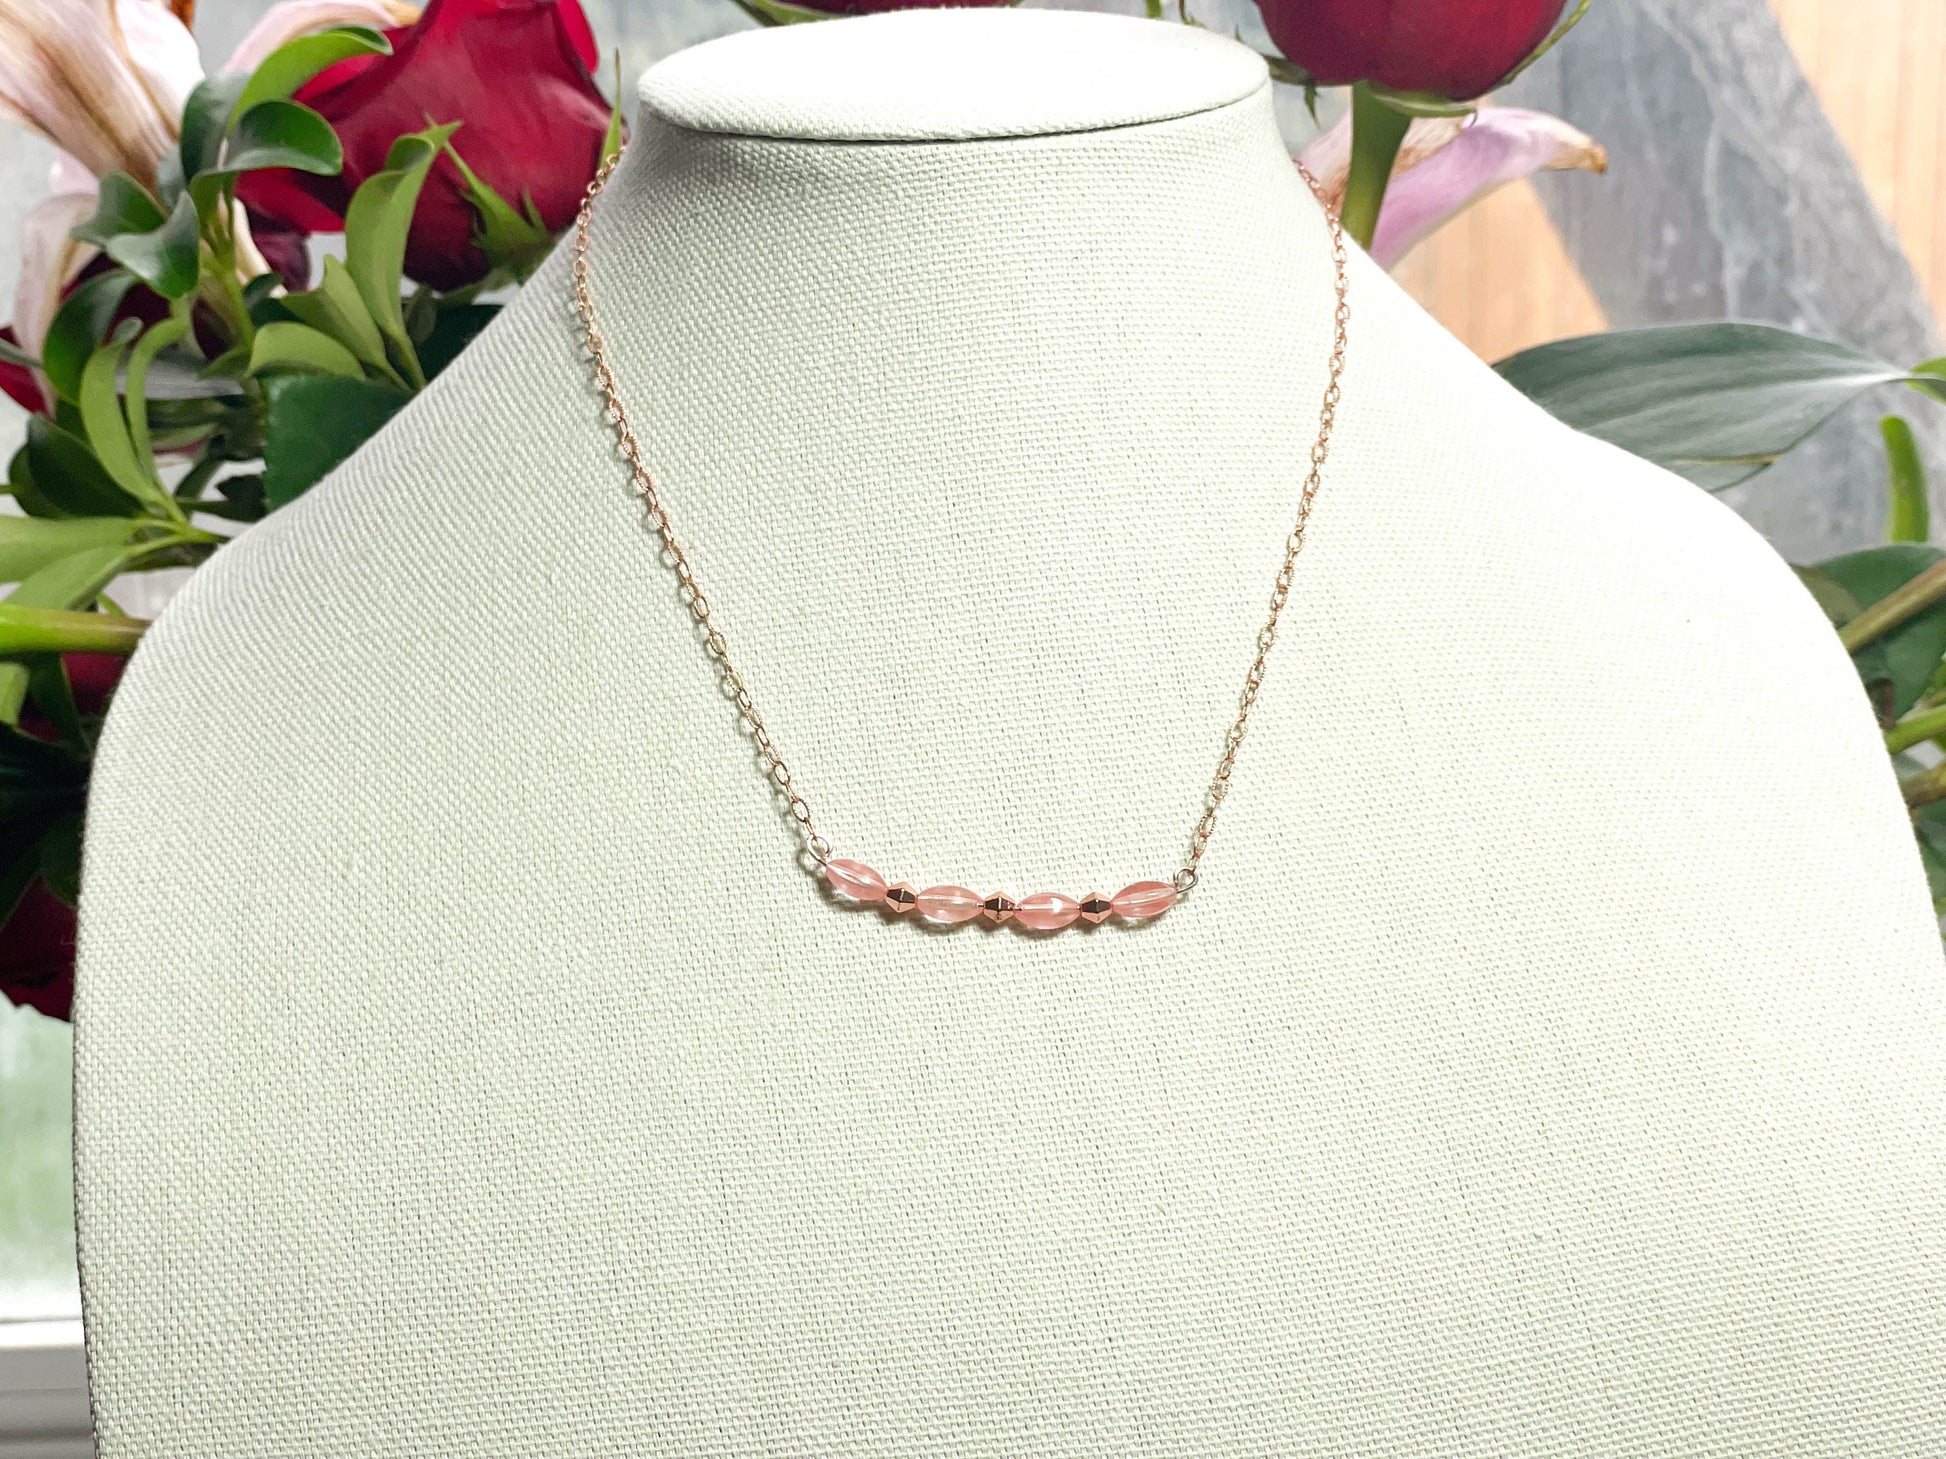 Rose gold and strawberry glass necklace